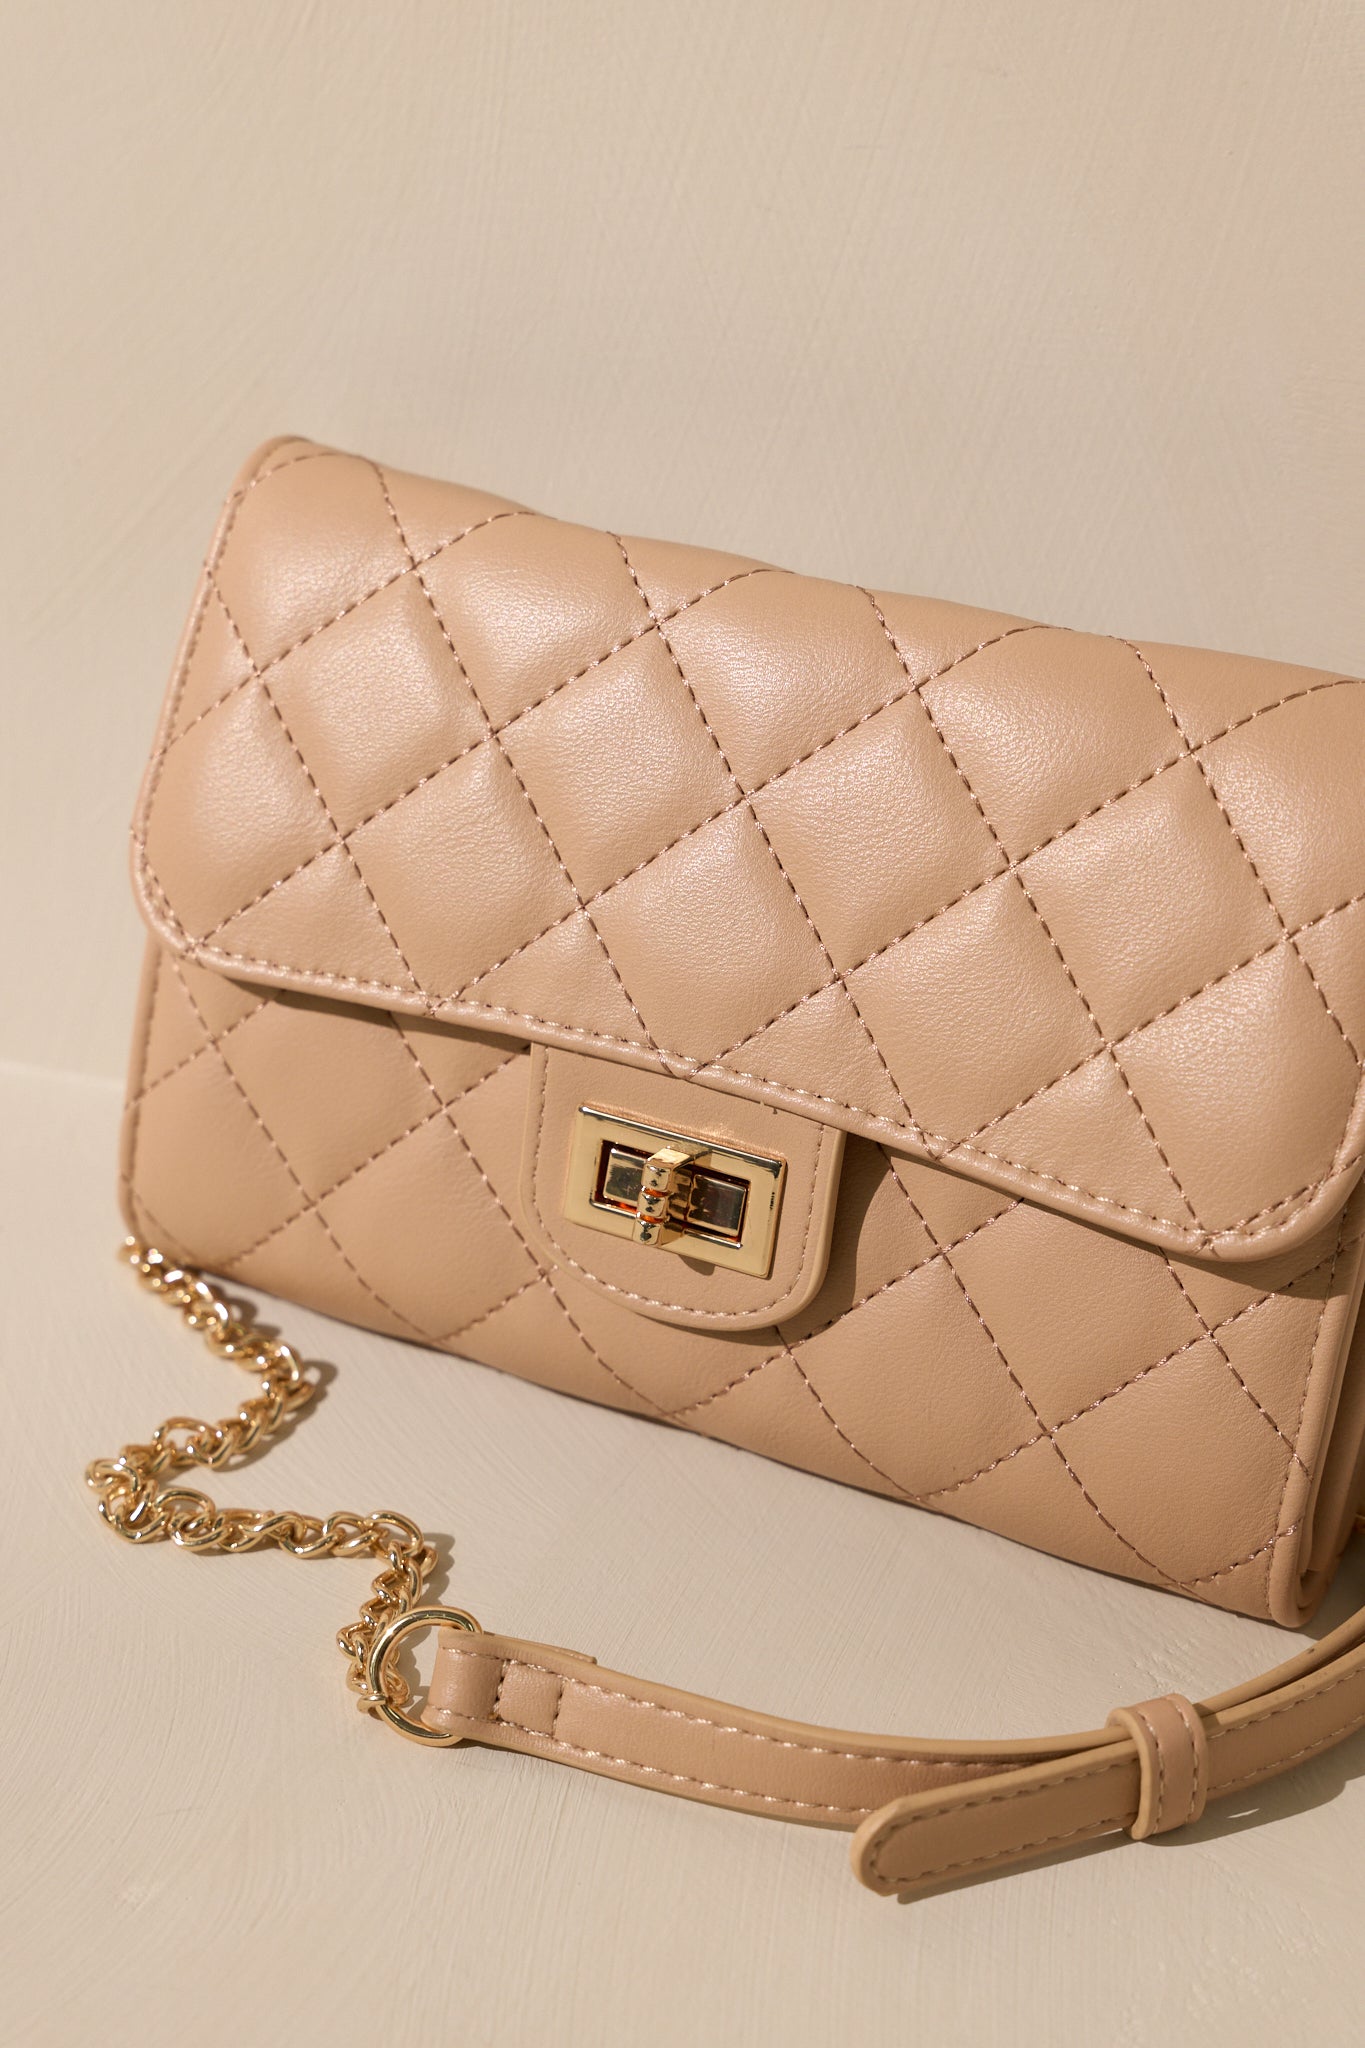 Front view of a beige quilted clutch bag with a front turn-lock closure.